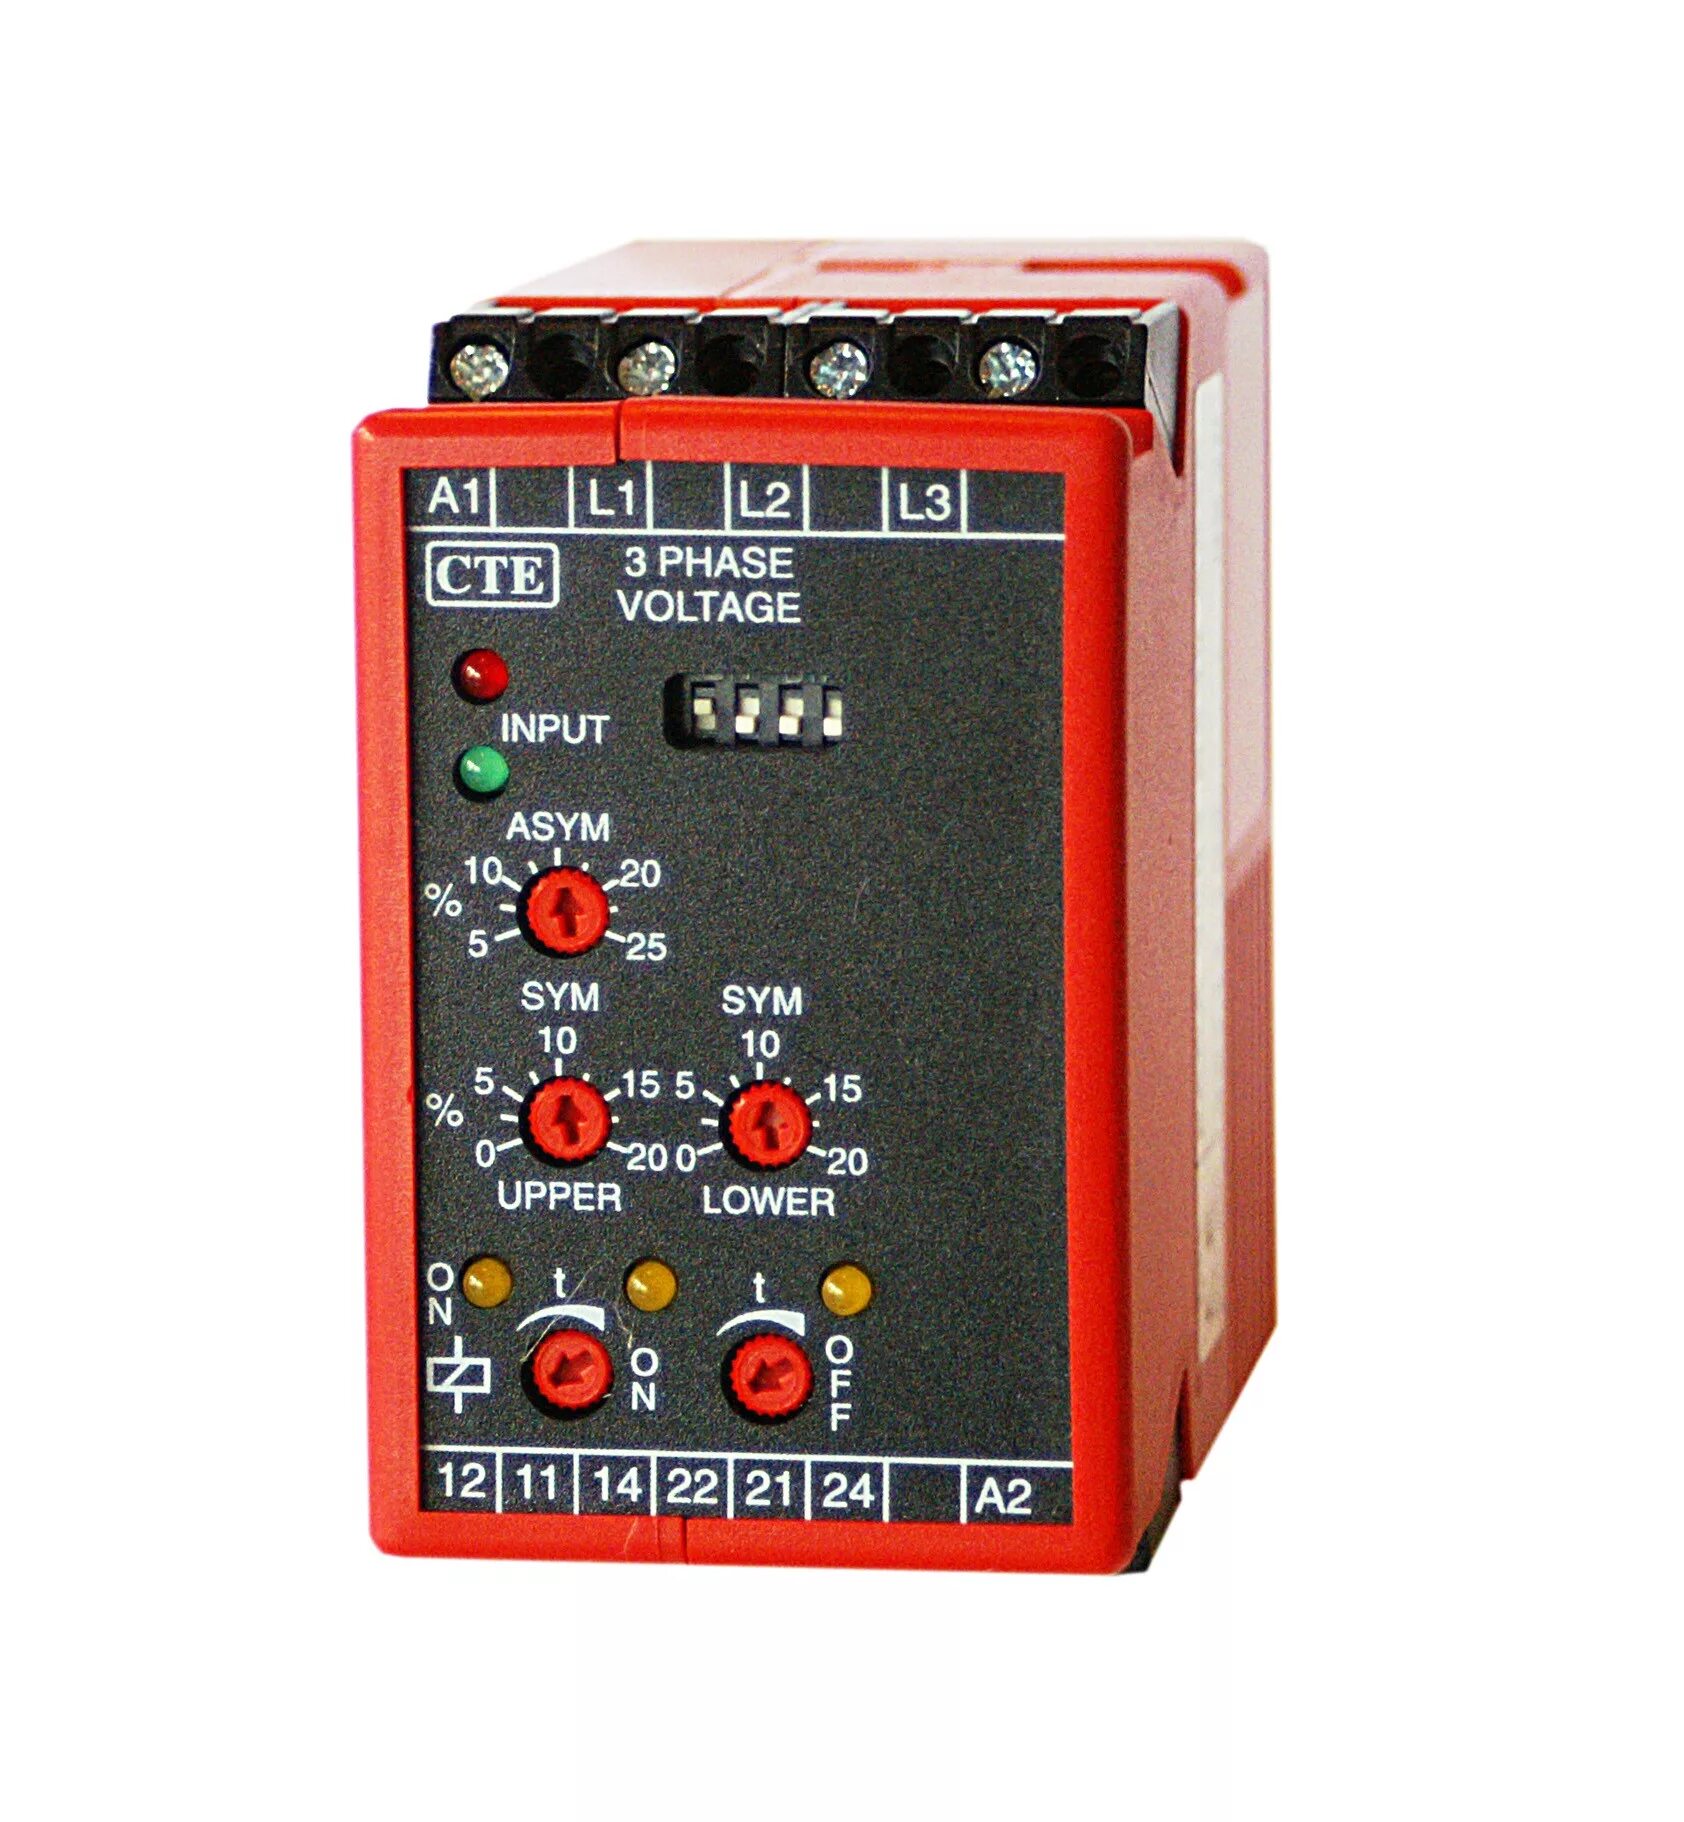 Voltage Controller. Tension Controller. Phase Control relay. Ds8337 контролер напряжения. Phase control